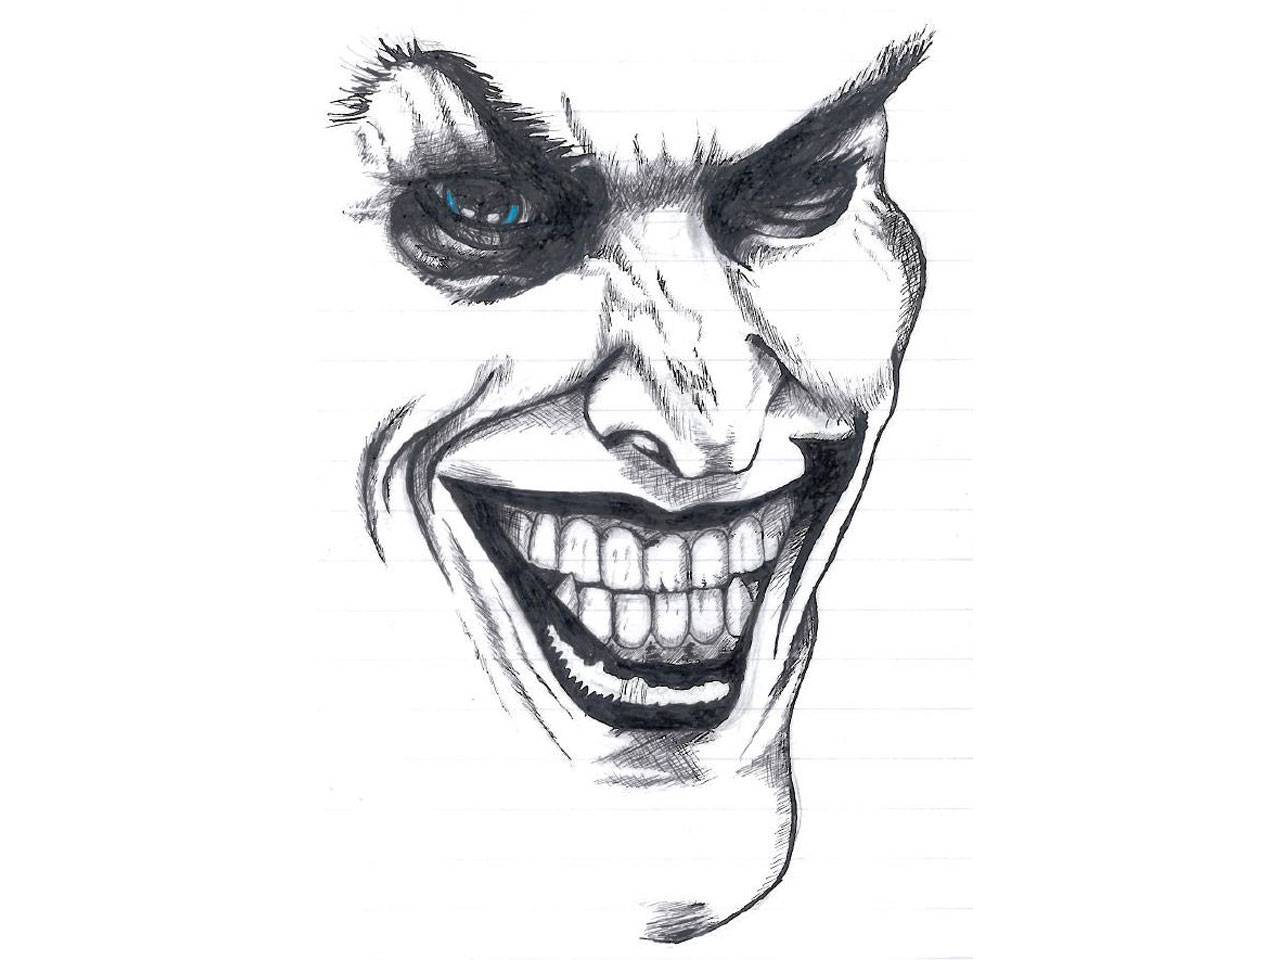 3. "Incredible Joker Tattoo Ideas for Your Next Ink" - wide 2